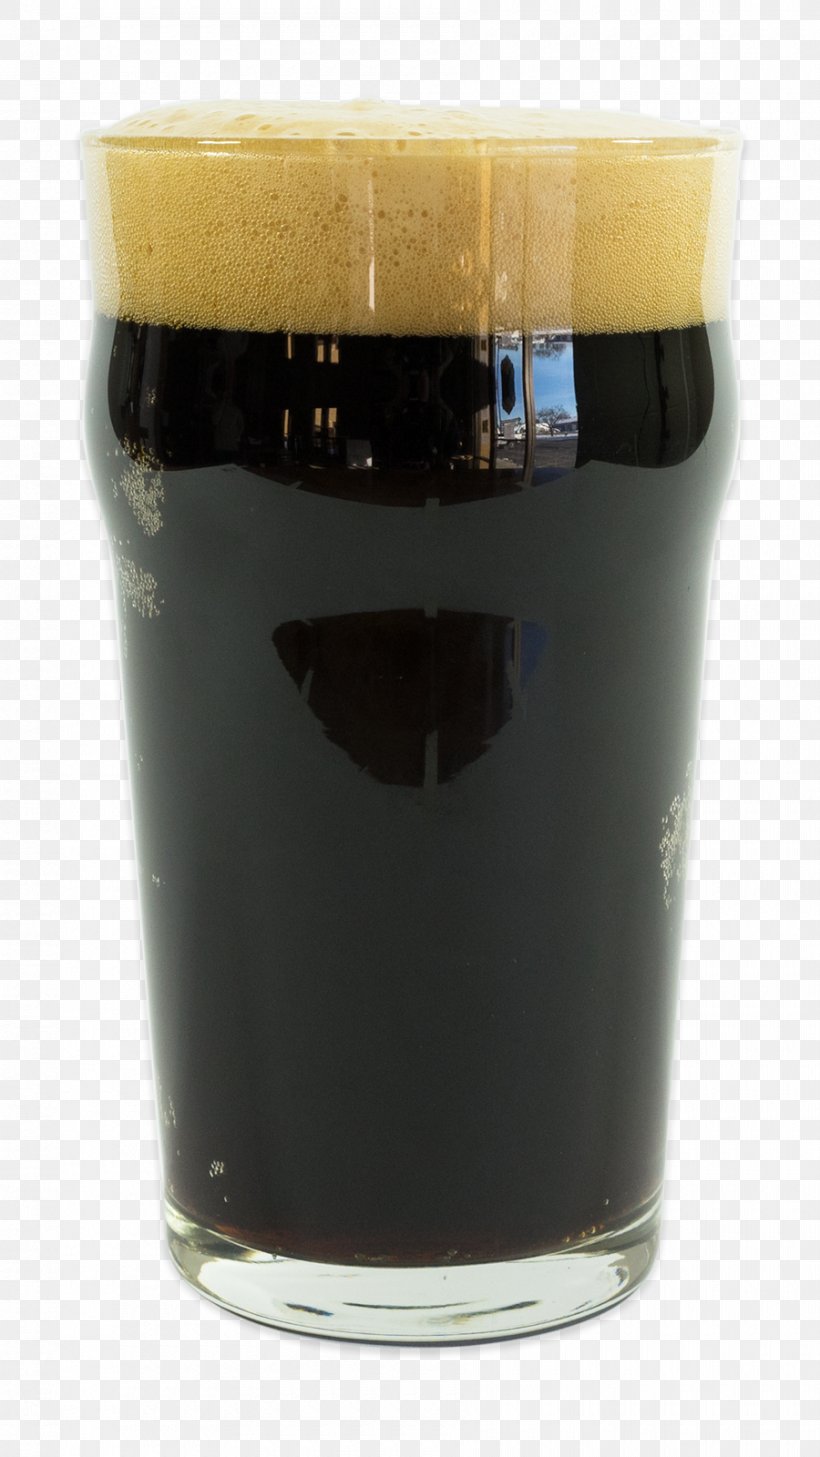 Beer Cocktail Pint Glass Stout Imperial Pint, PNG, 900x1600px, Beer Cocktail, Beer, Beer Glass, Drink, Glass Download Free